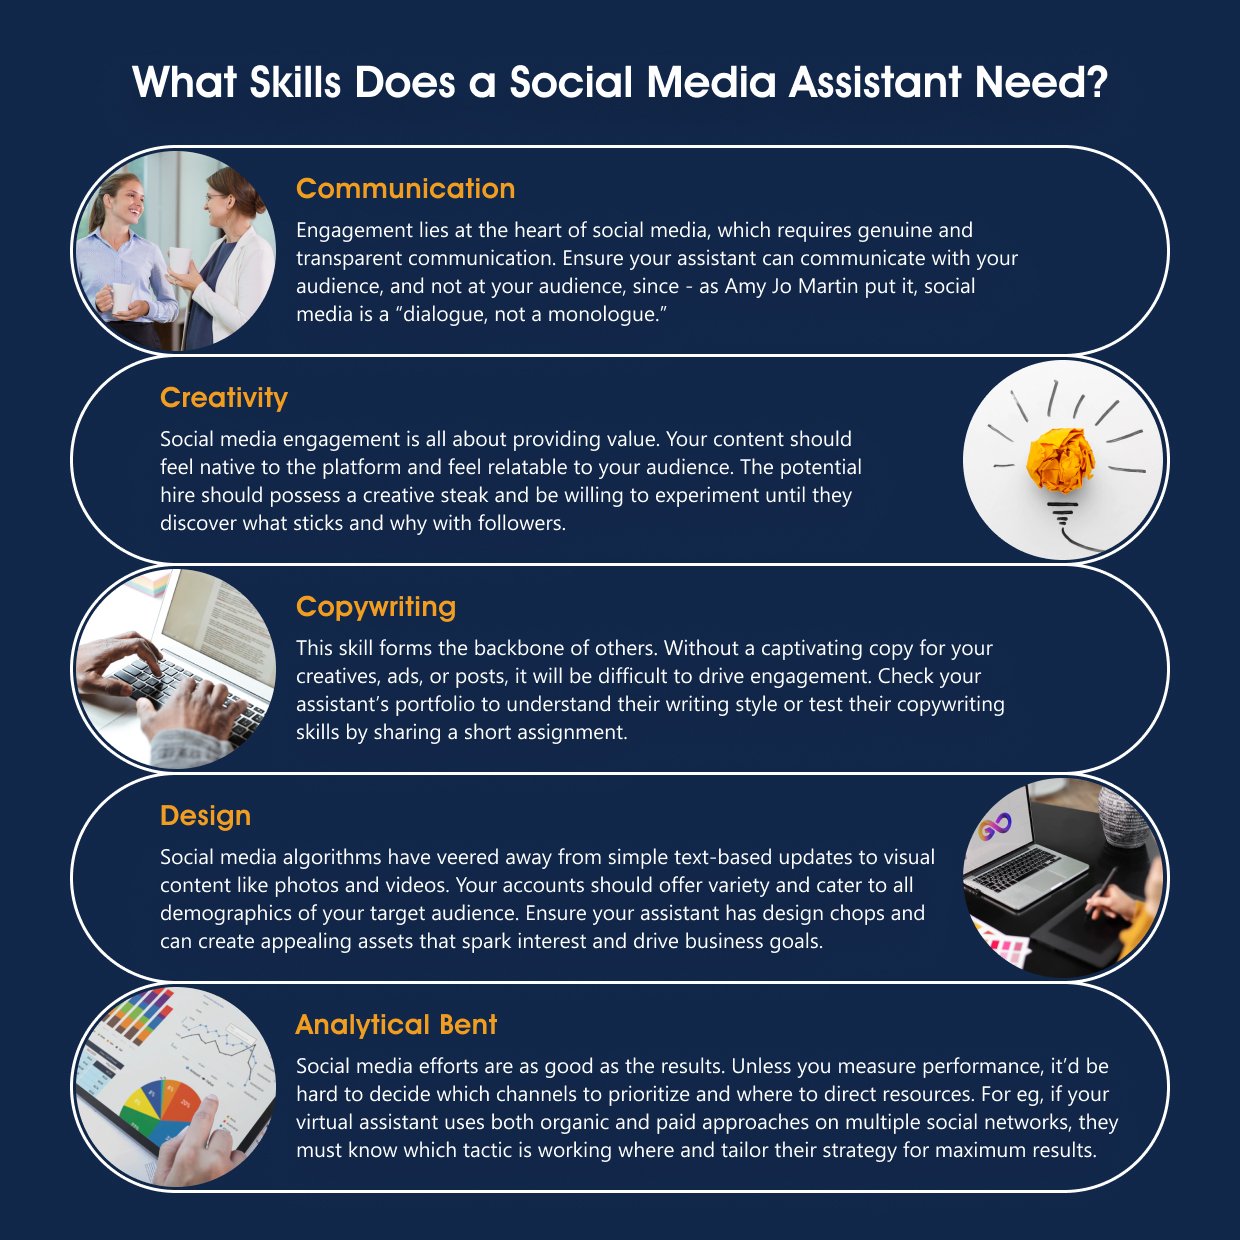 Five core skills that a social media virtual assistant needs to succeed in their role.